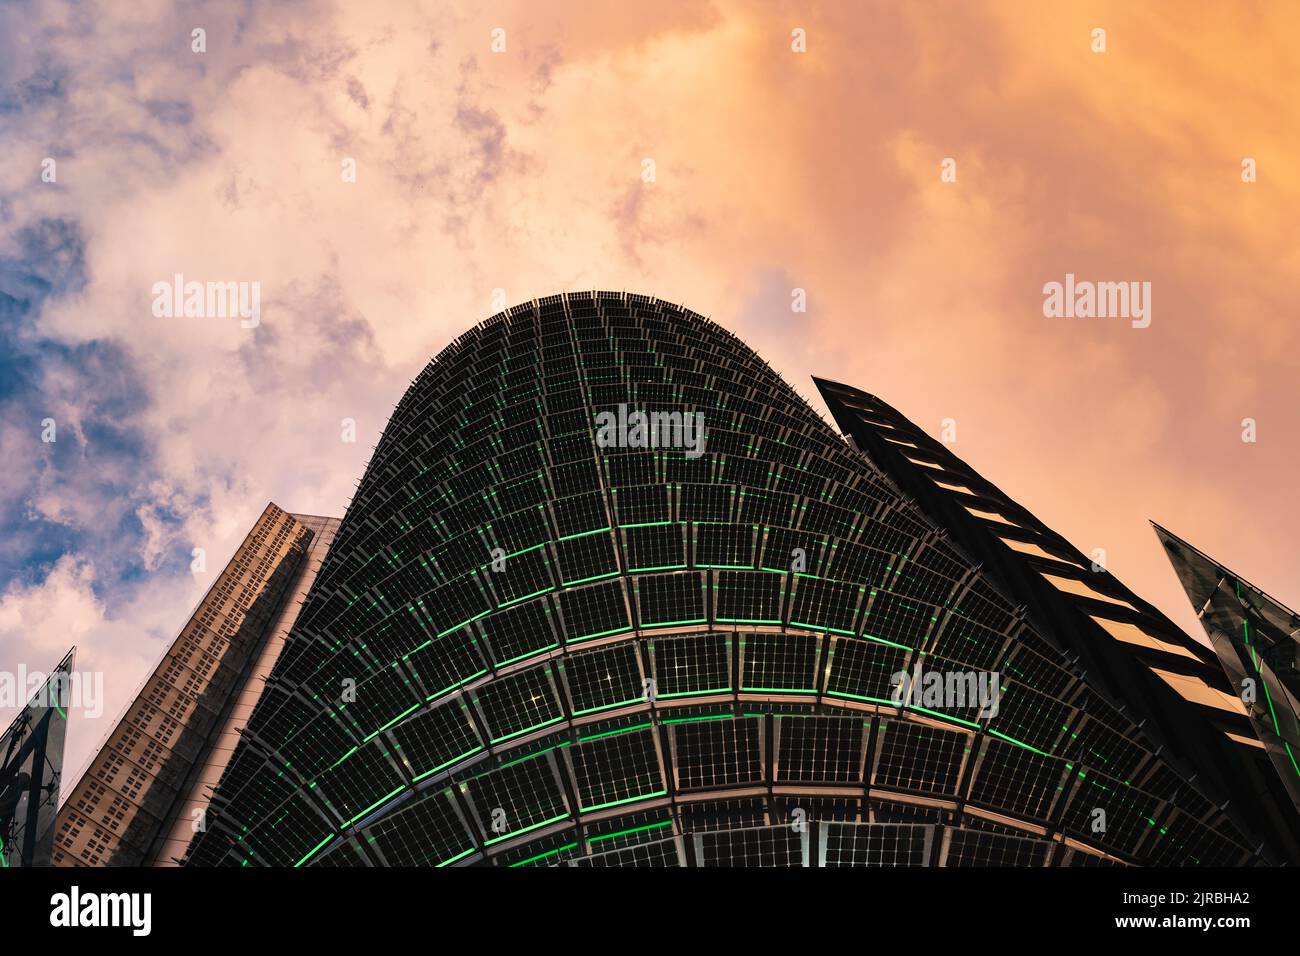 Spain, Madrid, Storm clouds over Torre Titania mall at dusk Stock Photo